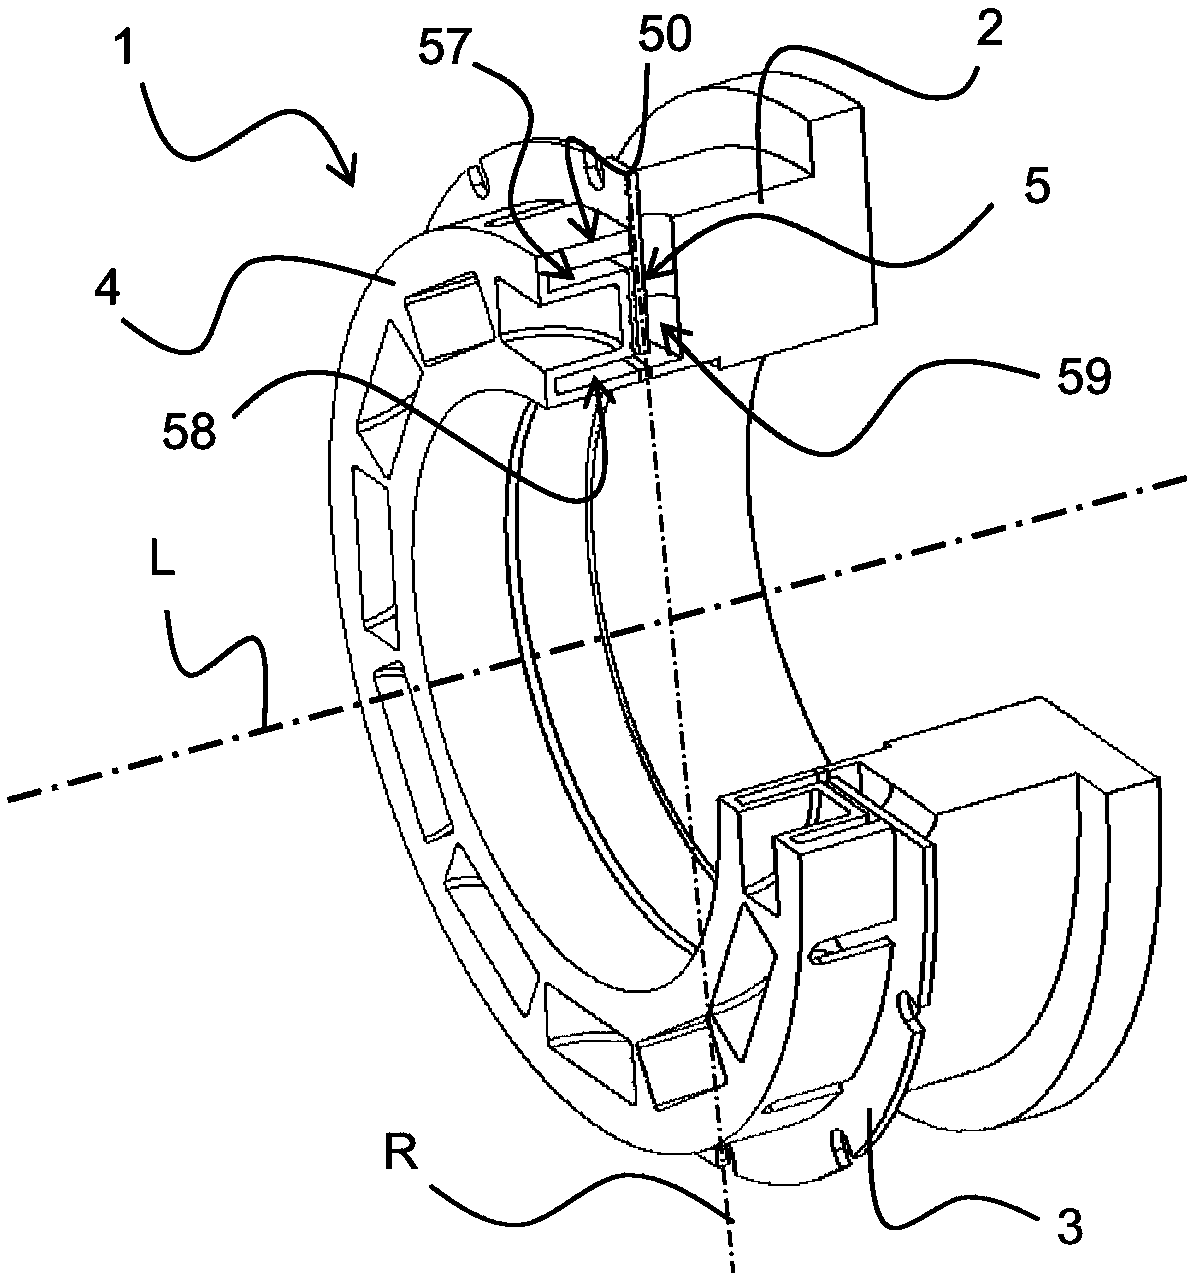 Flange for an electrical machine